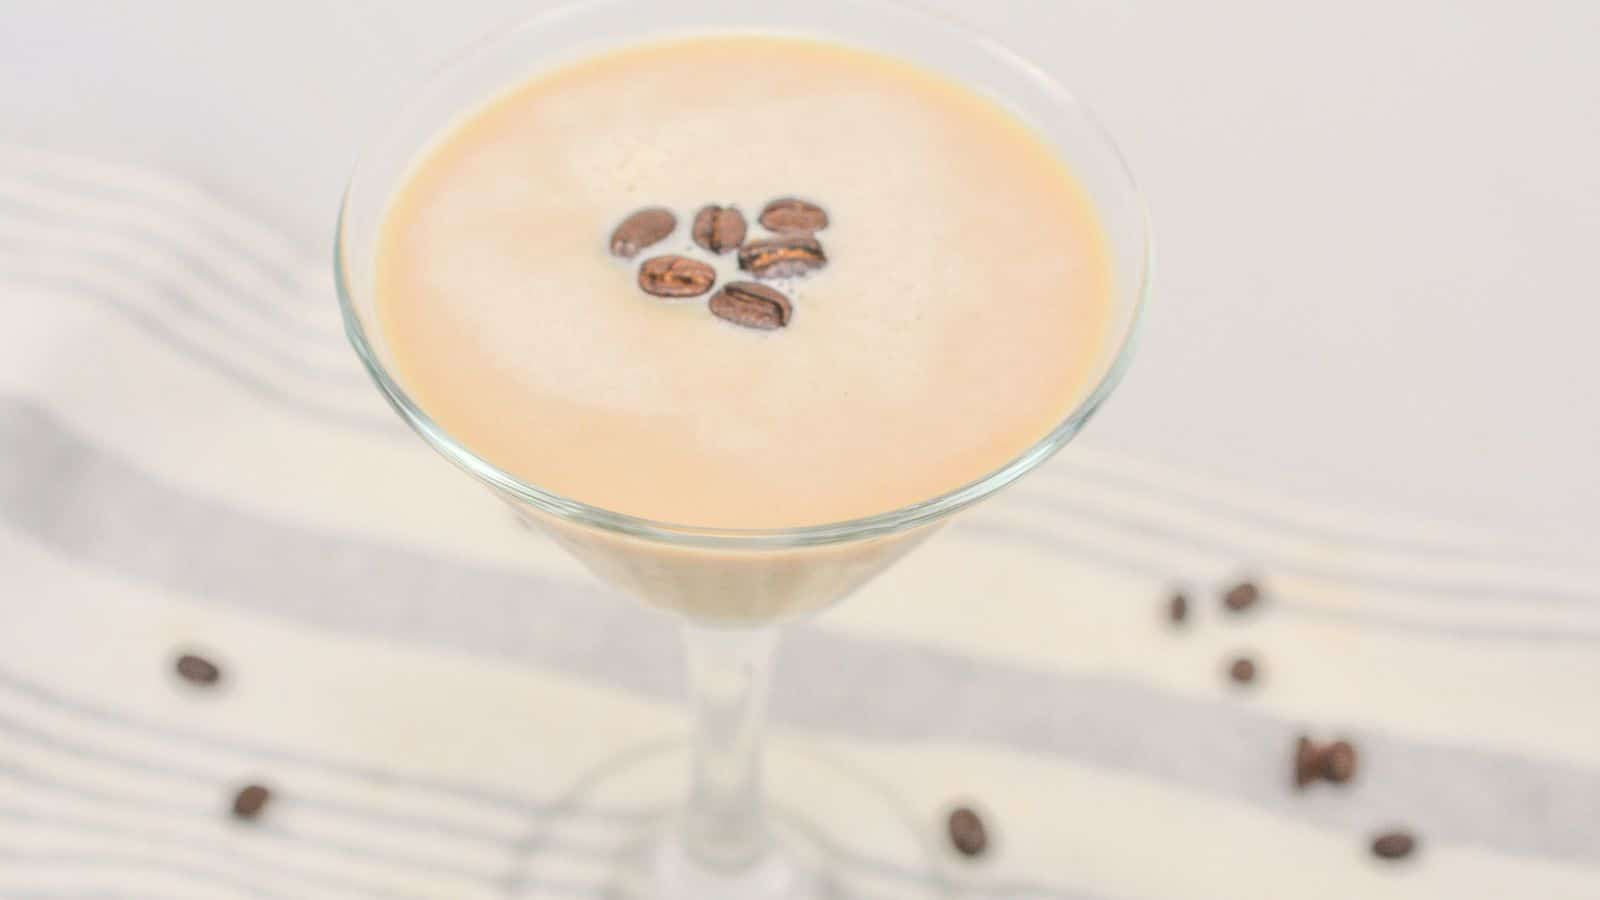 A creamy coffee drink in a martini glass, topped with coffee beans, on a striped cloth with scattered beans around.